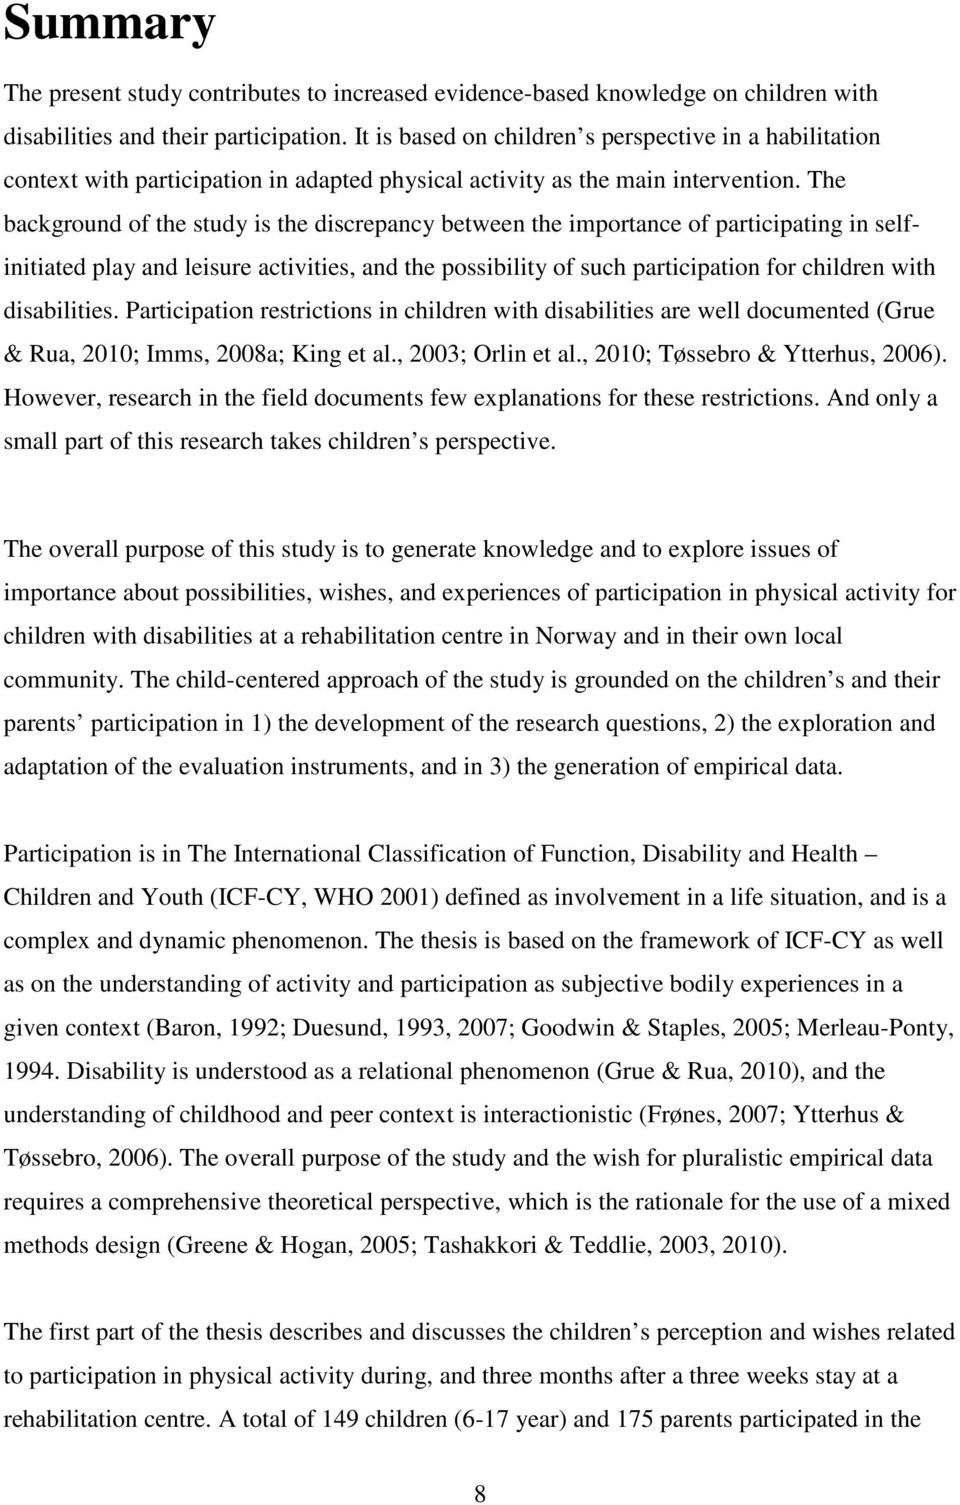 The background of the study is the discrepancy between the importance of participating in selfinitiated play and leisure activities, and the possibility of such participation for children with